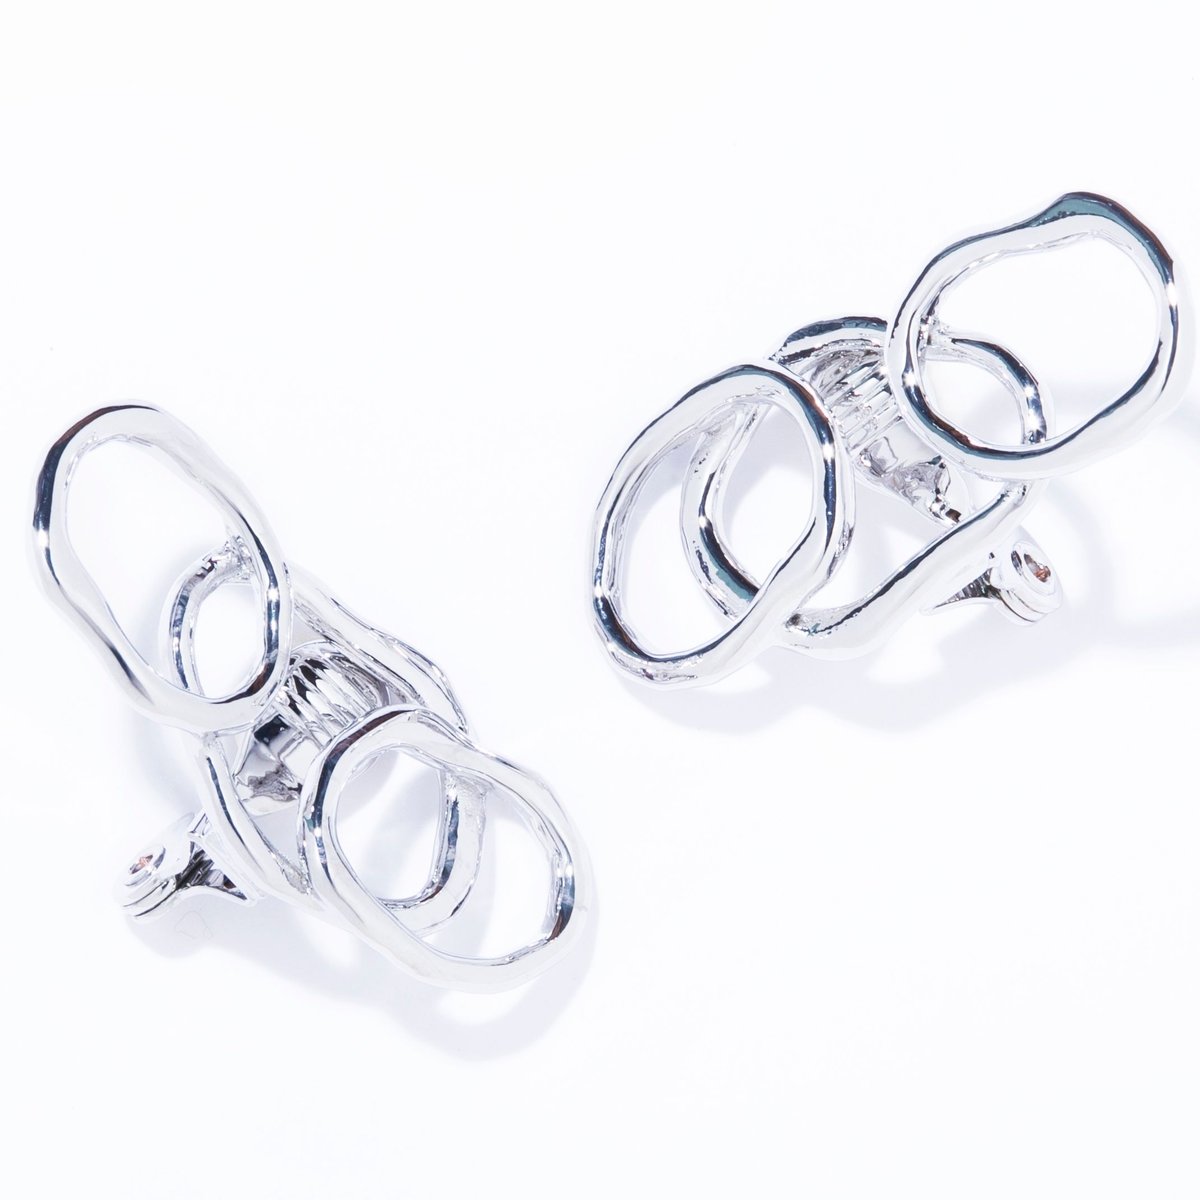 vein earring / silver,gold | IRIS47 official on...